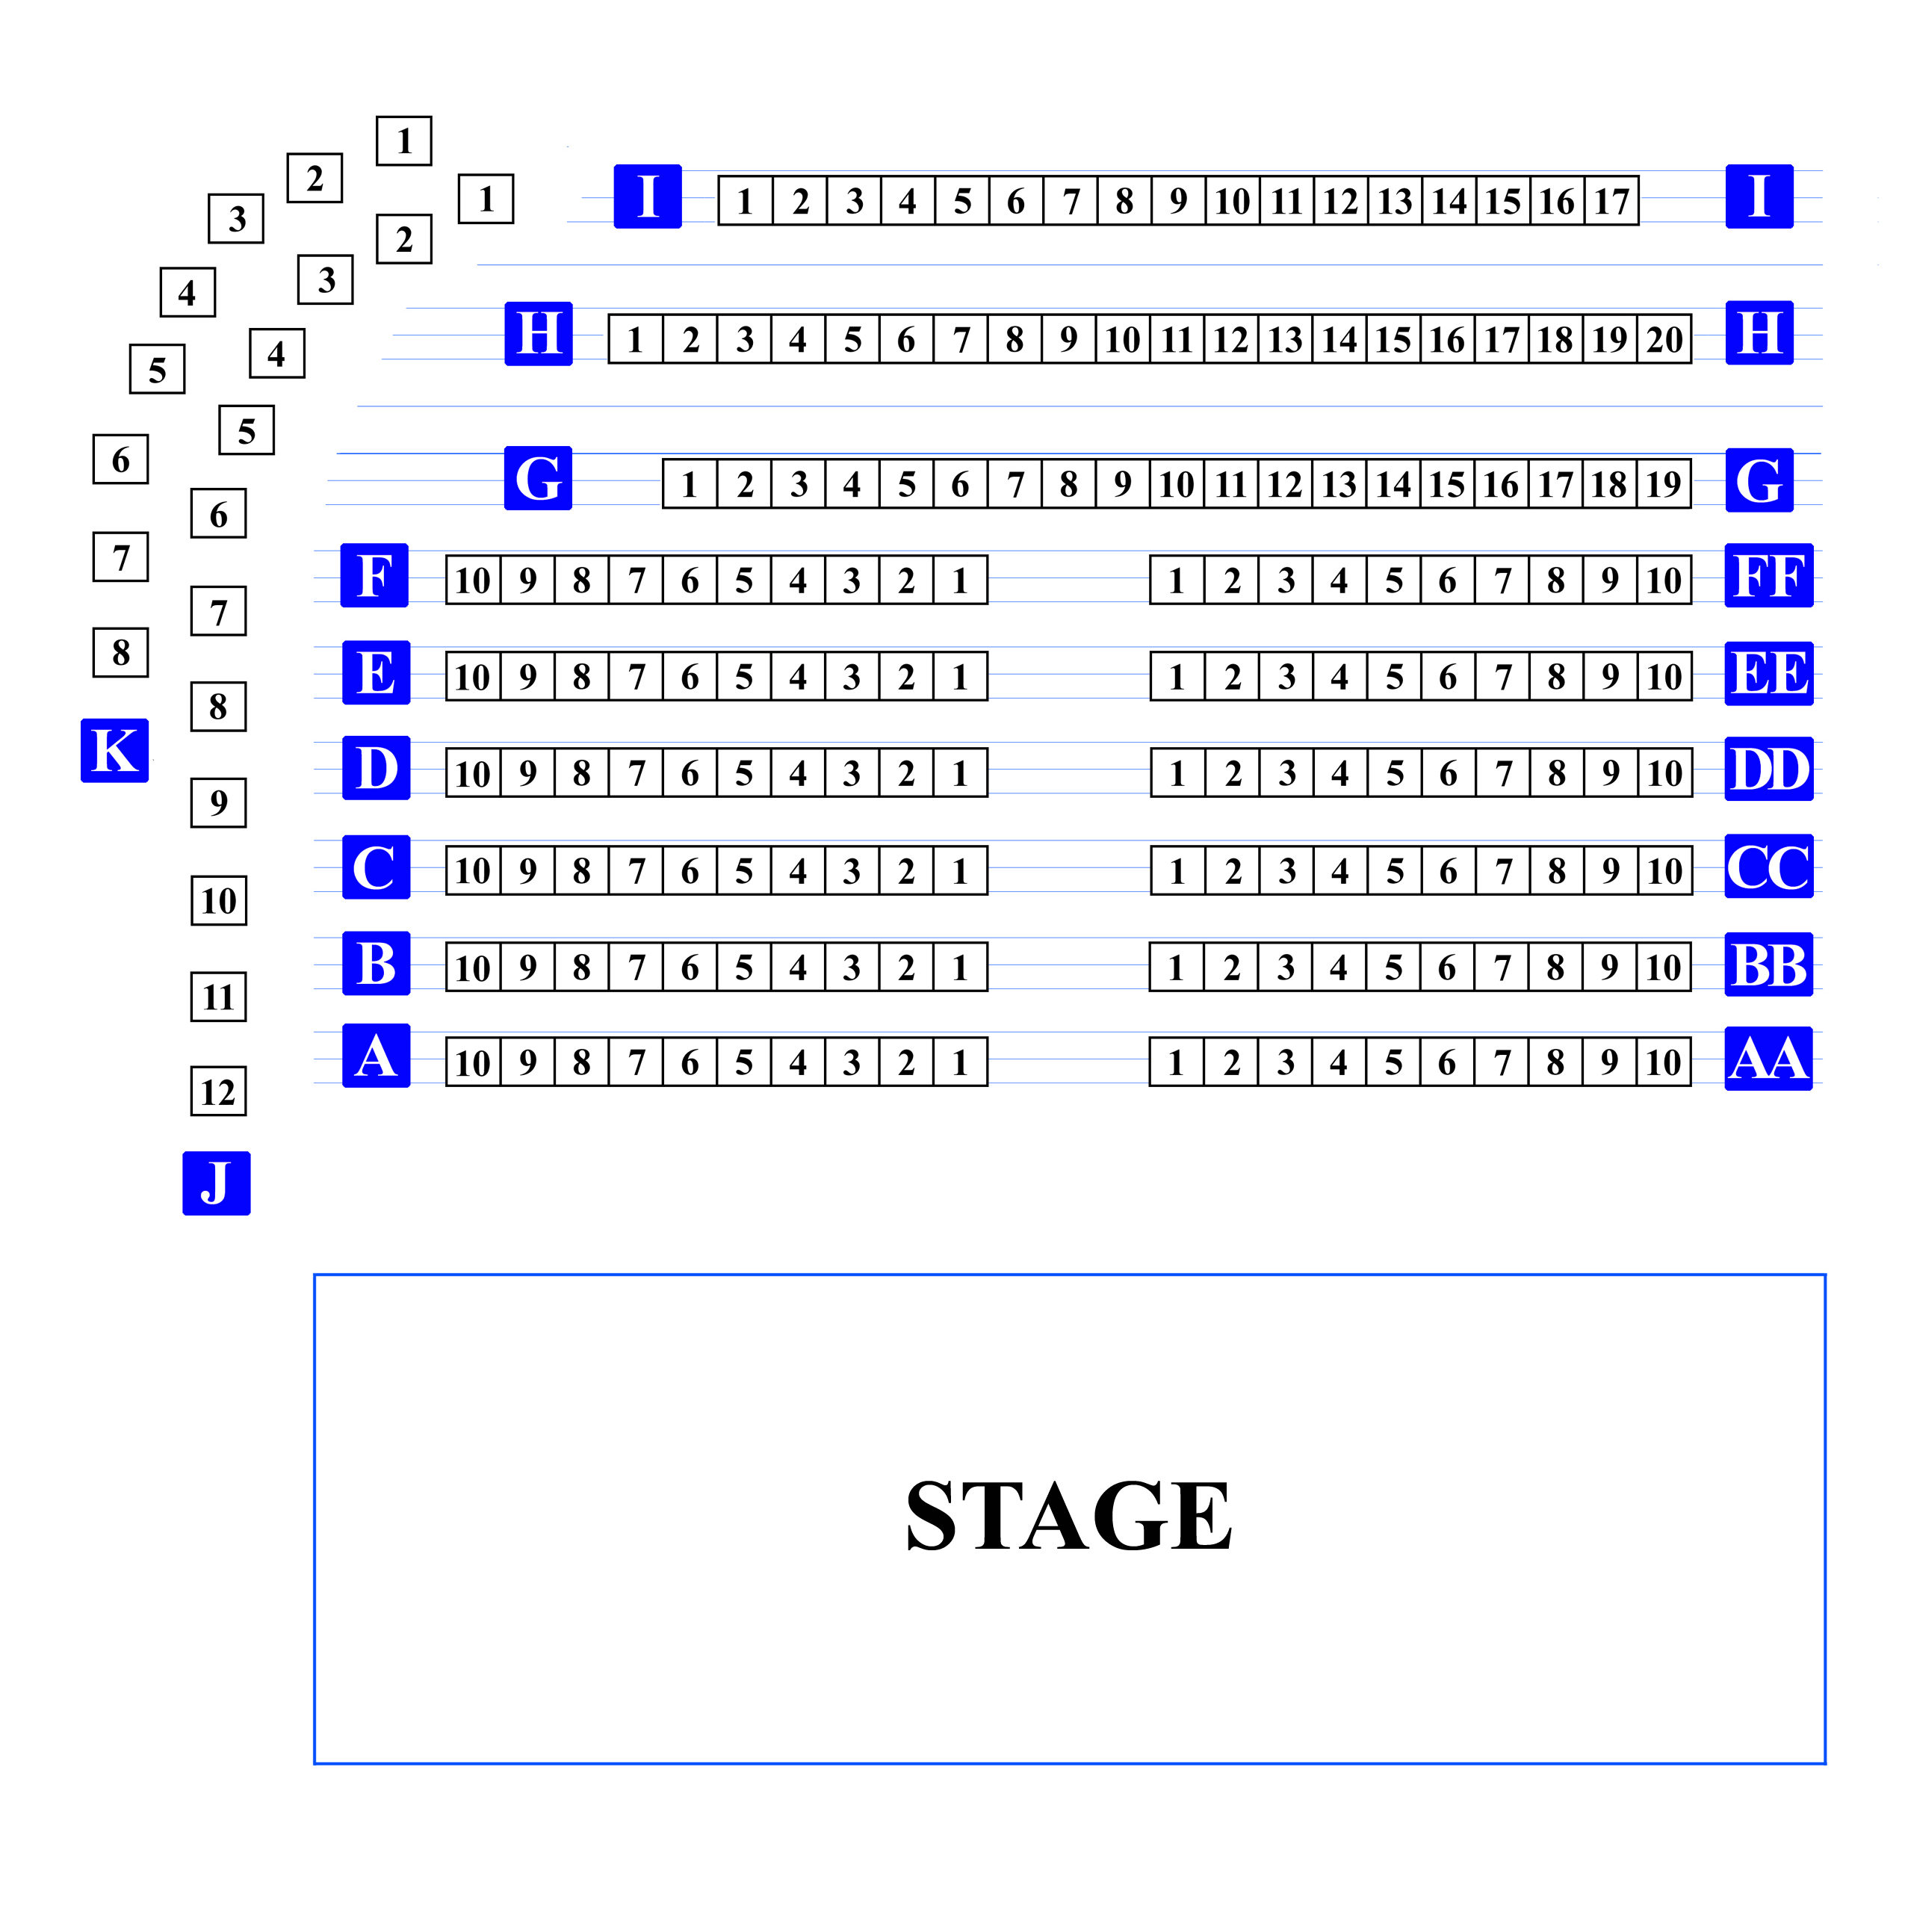 Stages Repertory Theatre Seating Chart